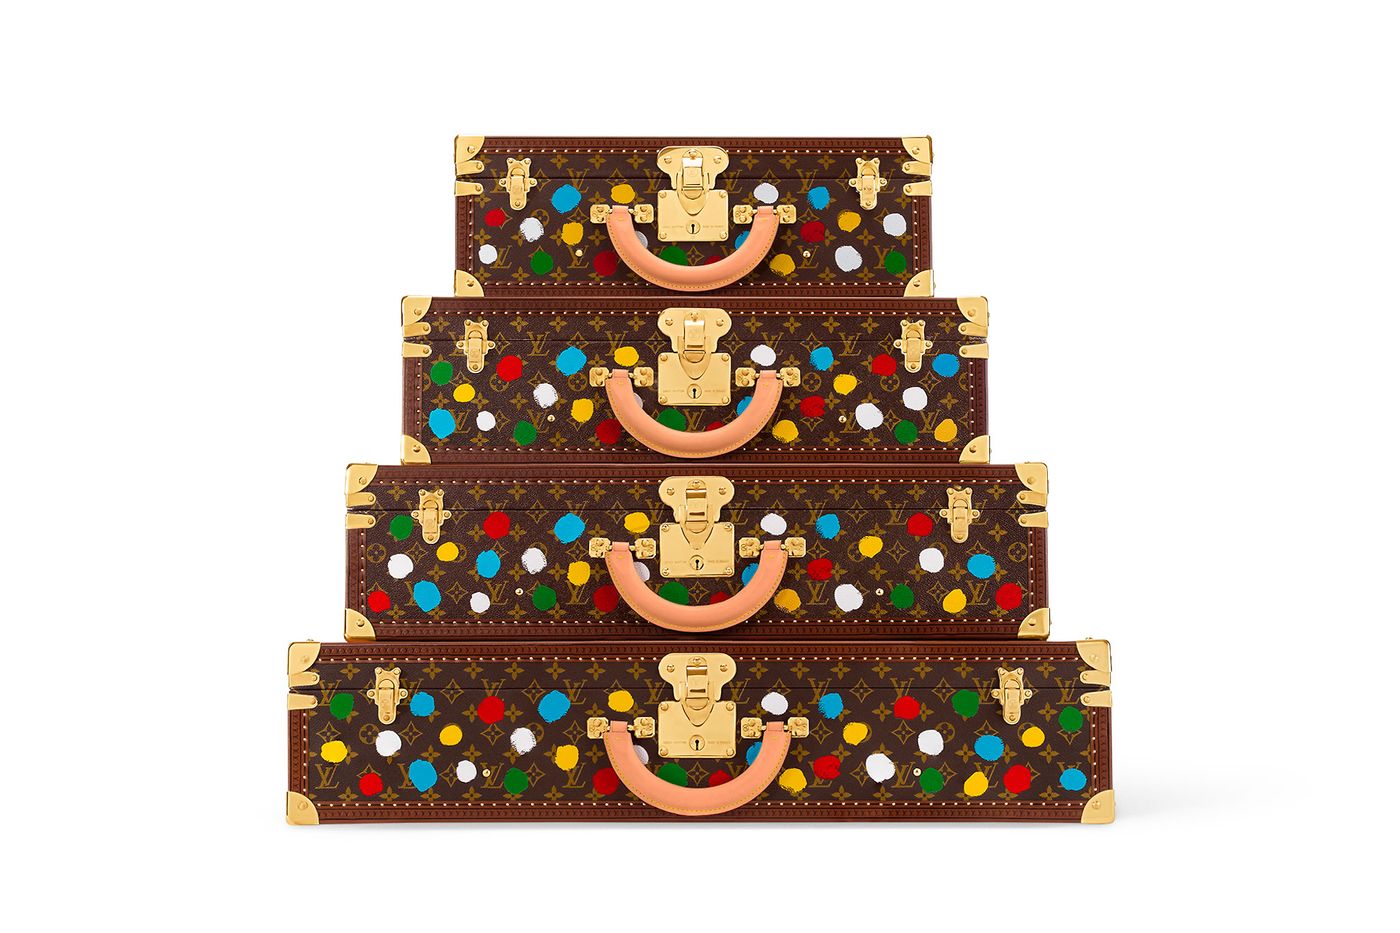 Polka dot fever: Louis Vuitton has a second collaboration with